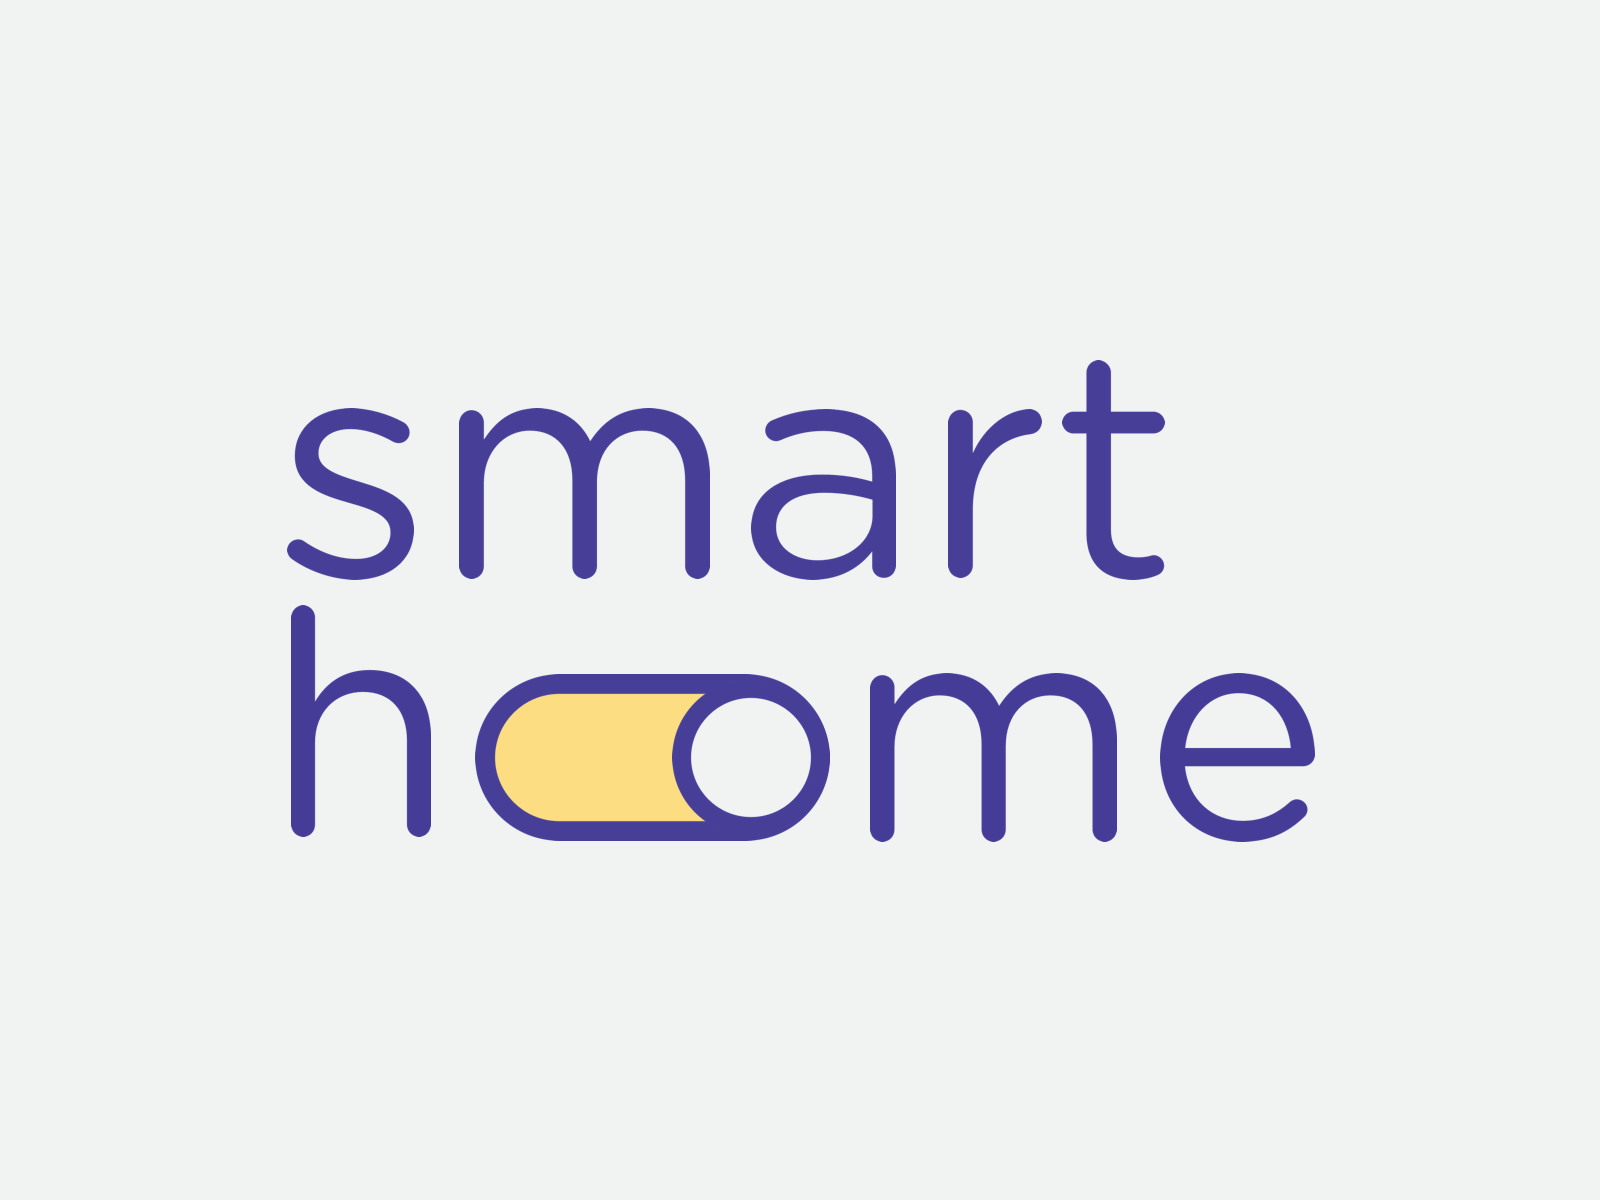 Smart Home animated logo / switch off / switch on